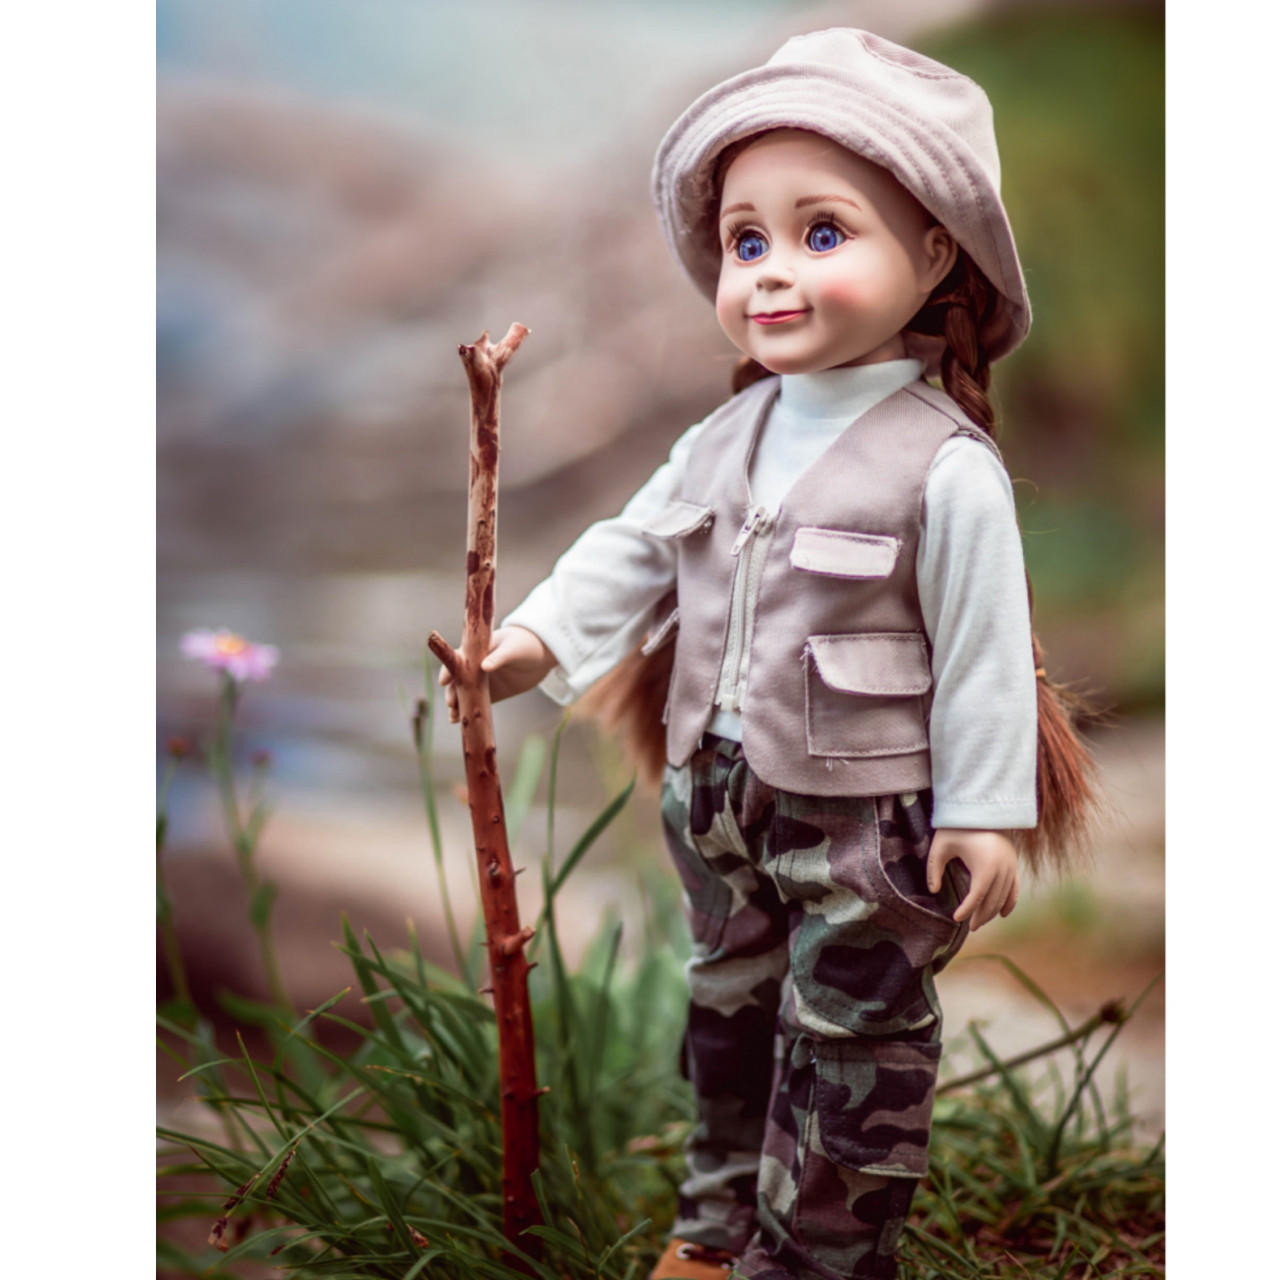 American Fishing Adventure Set for 18 Girl or Boy Doll Accessories